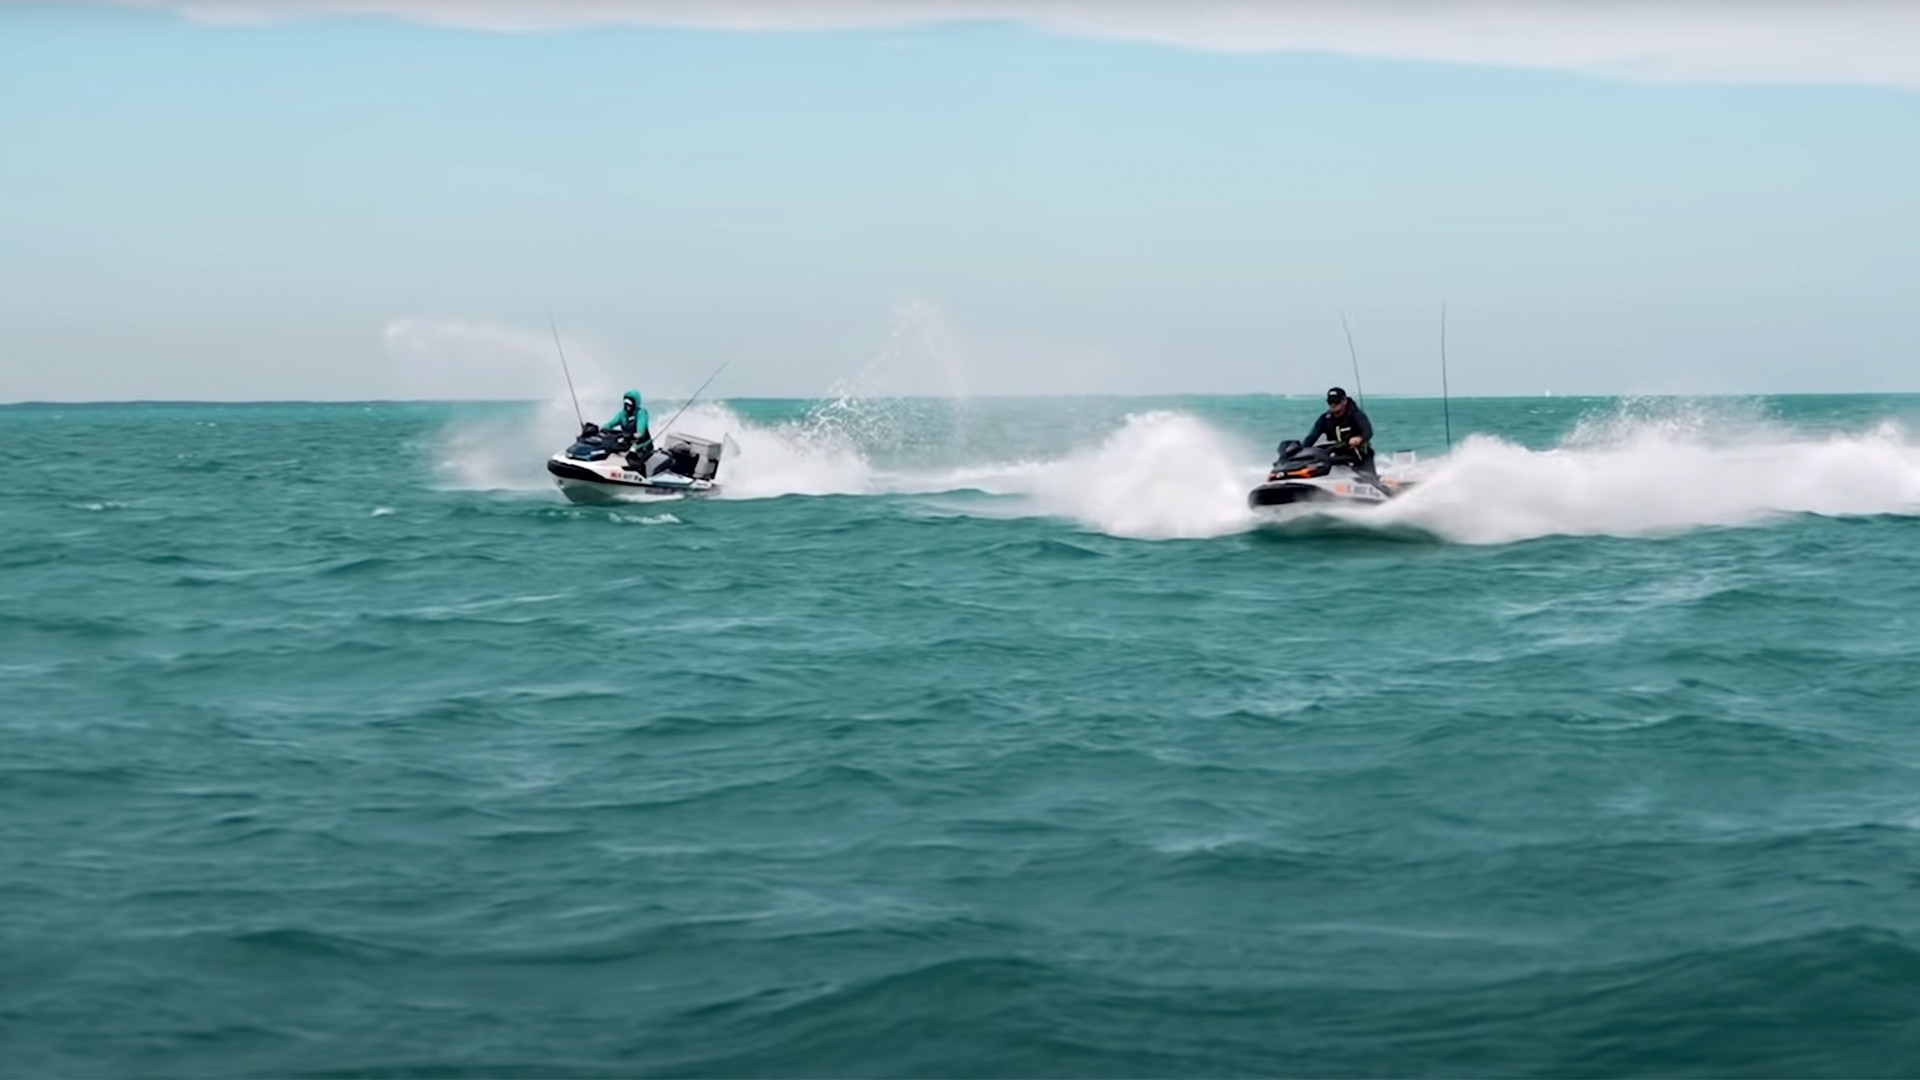 Clay and Stephanie Cowart riding on their Sea-Doo FishPro